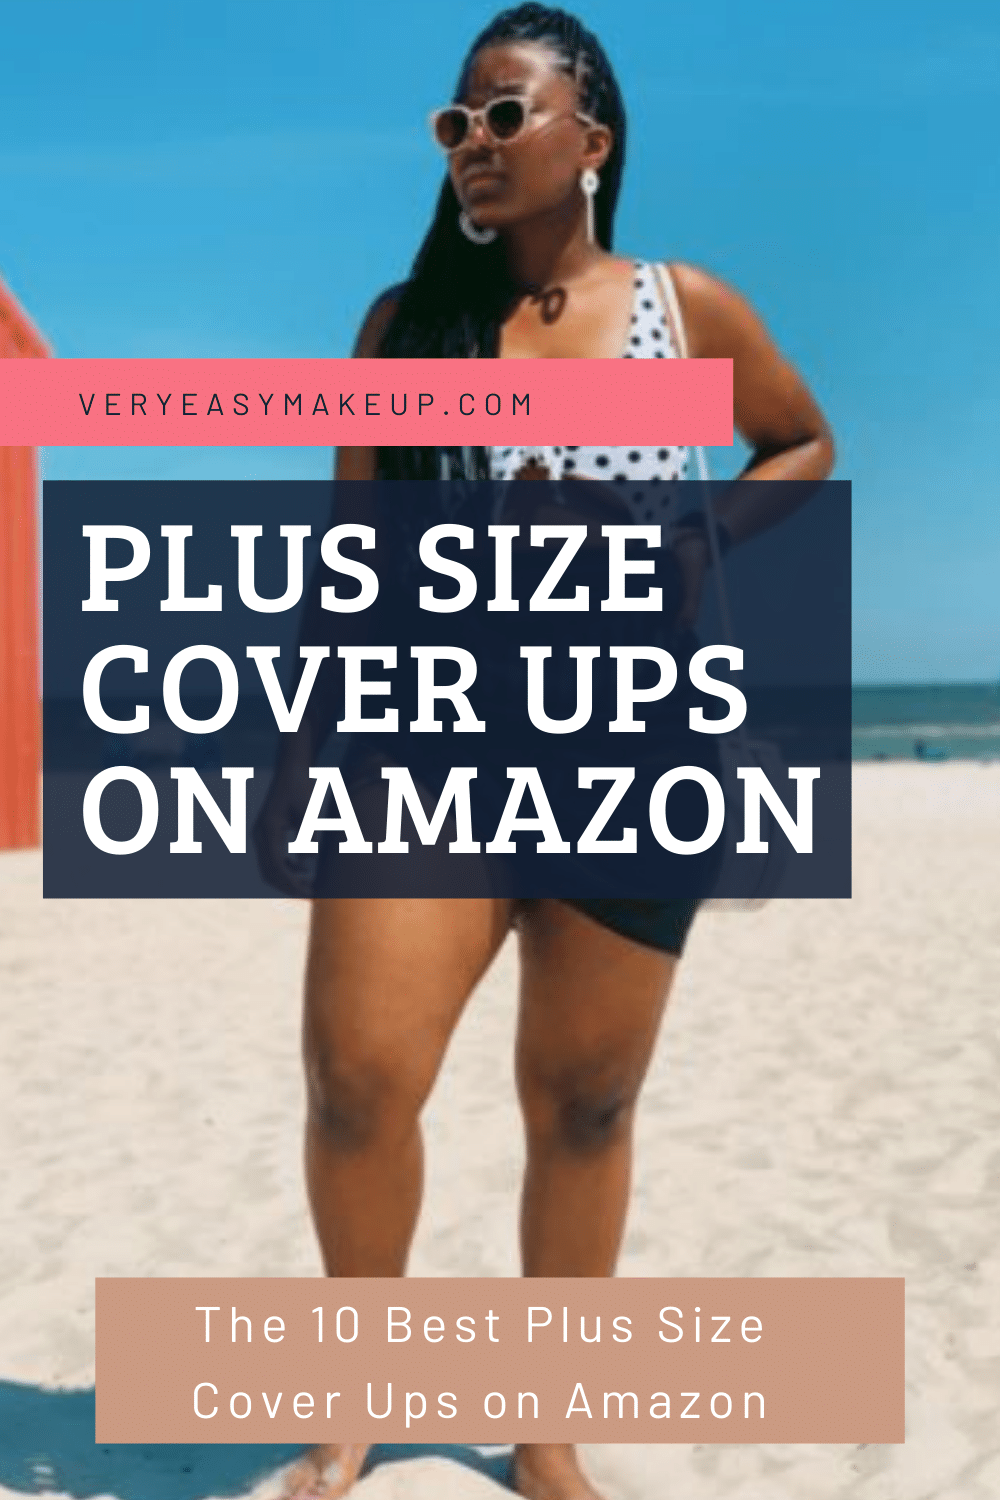 The 10 Best Plus Size Cover Ups on Amazon by Very Easy Makeup